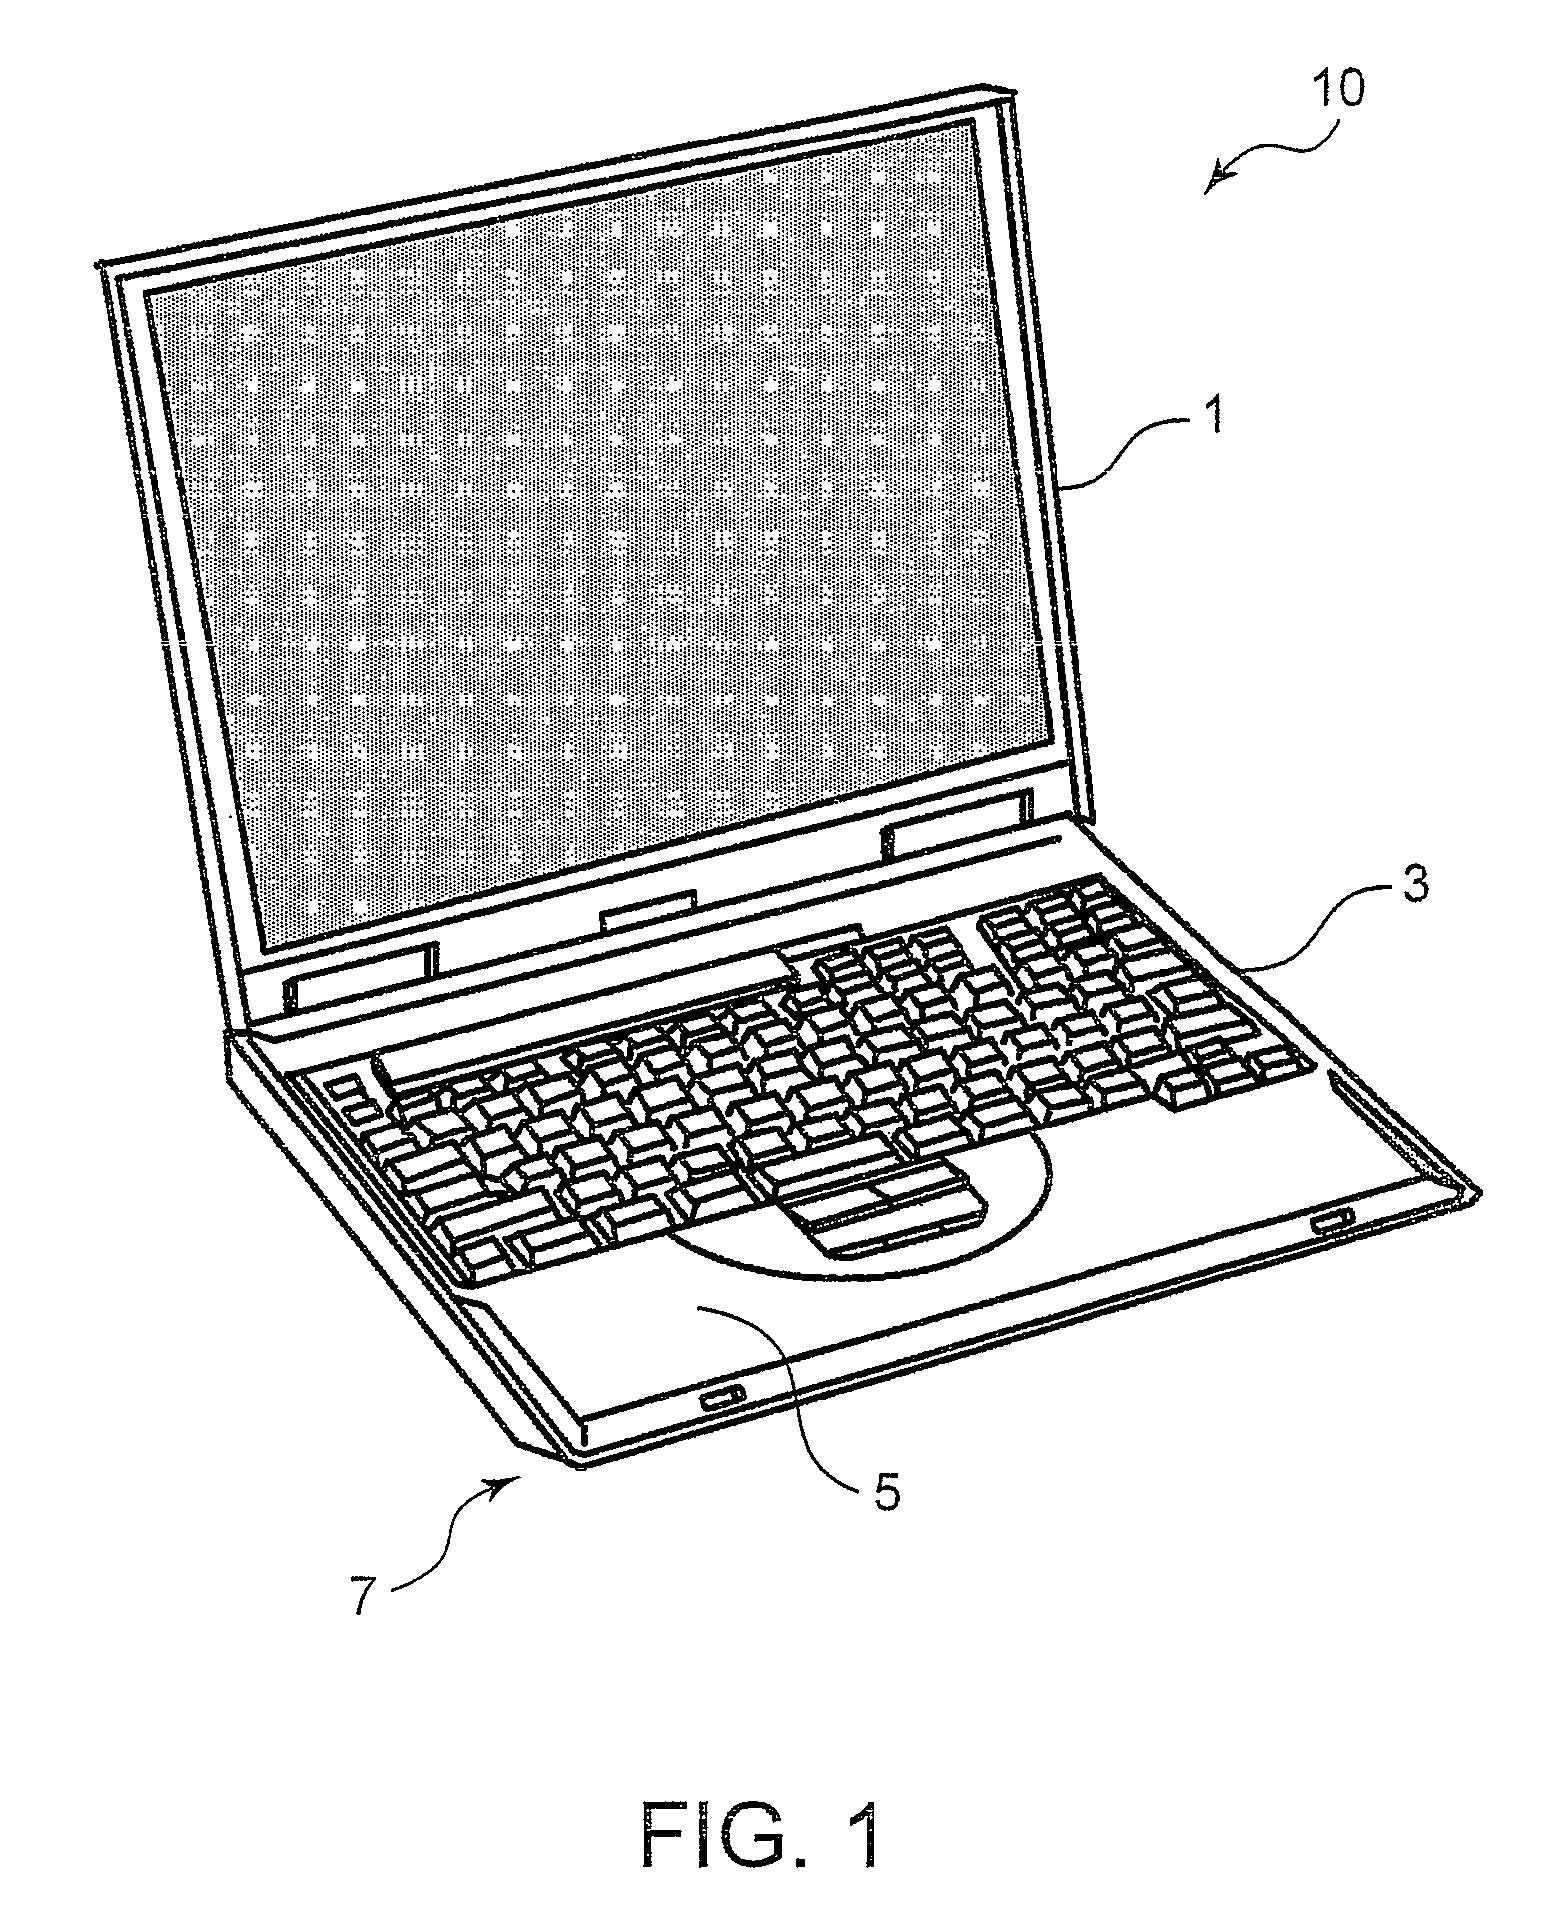 Heat dissipation system for computers